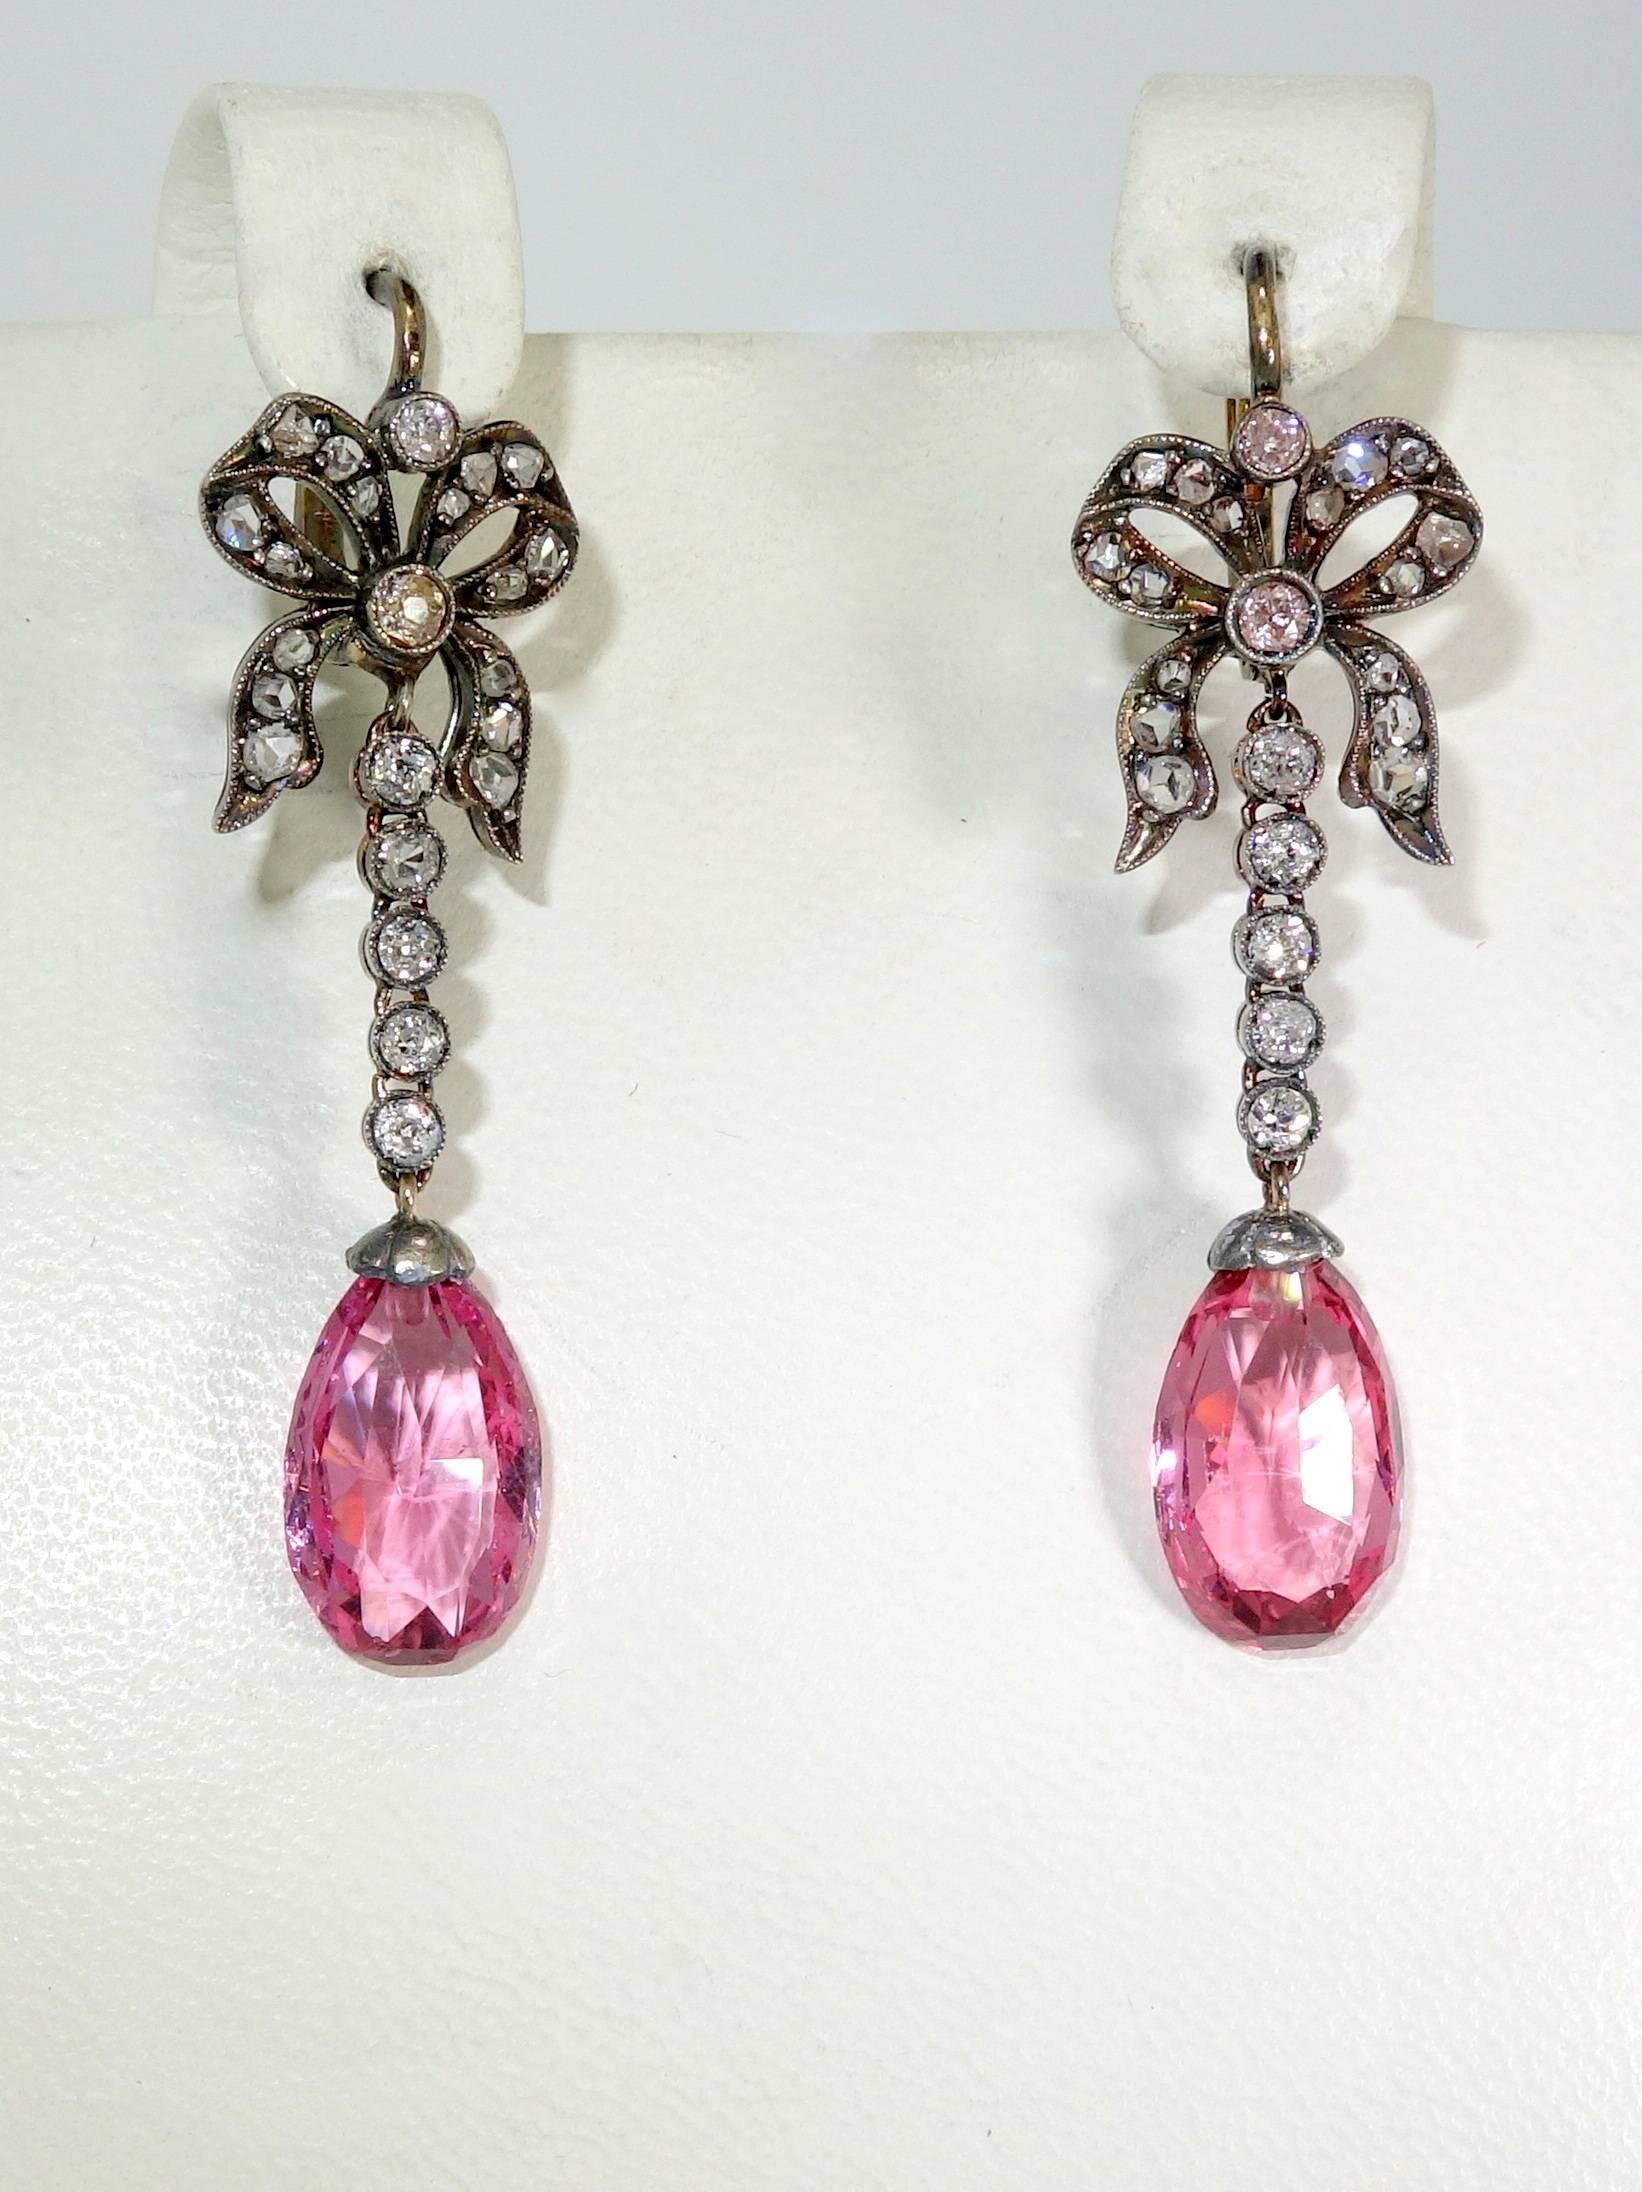 Certificate from the A.G.L. (American Gem Lab), accompanies these earrings and states that the matching pink spinels are natural with no evidence of heat treatments.  The bright pink stones which weigh 10.17 cts., are suspended from 46 rose cut and